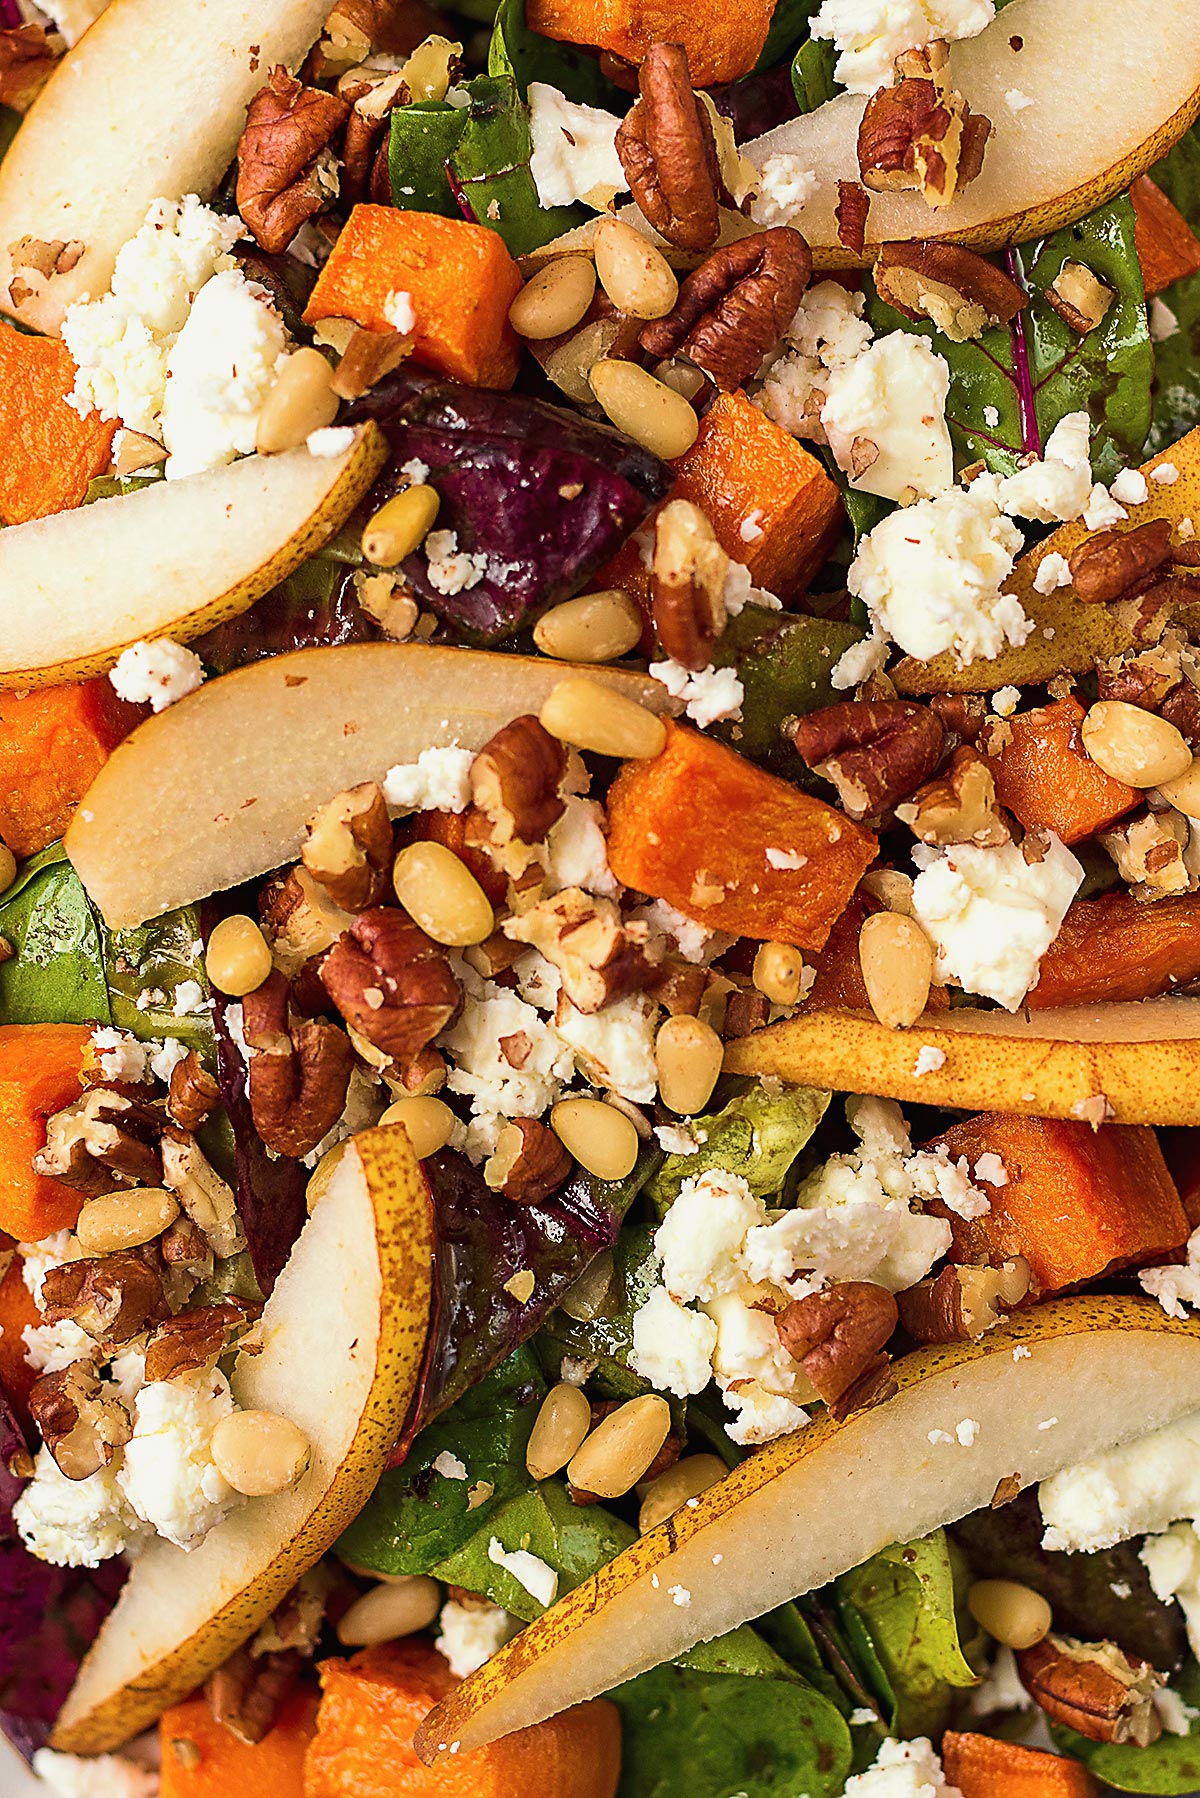 Salad leaves mixed with pear slices, sweet potato cubes and pine nuts.